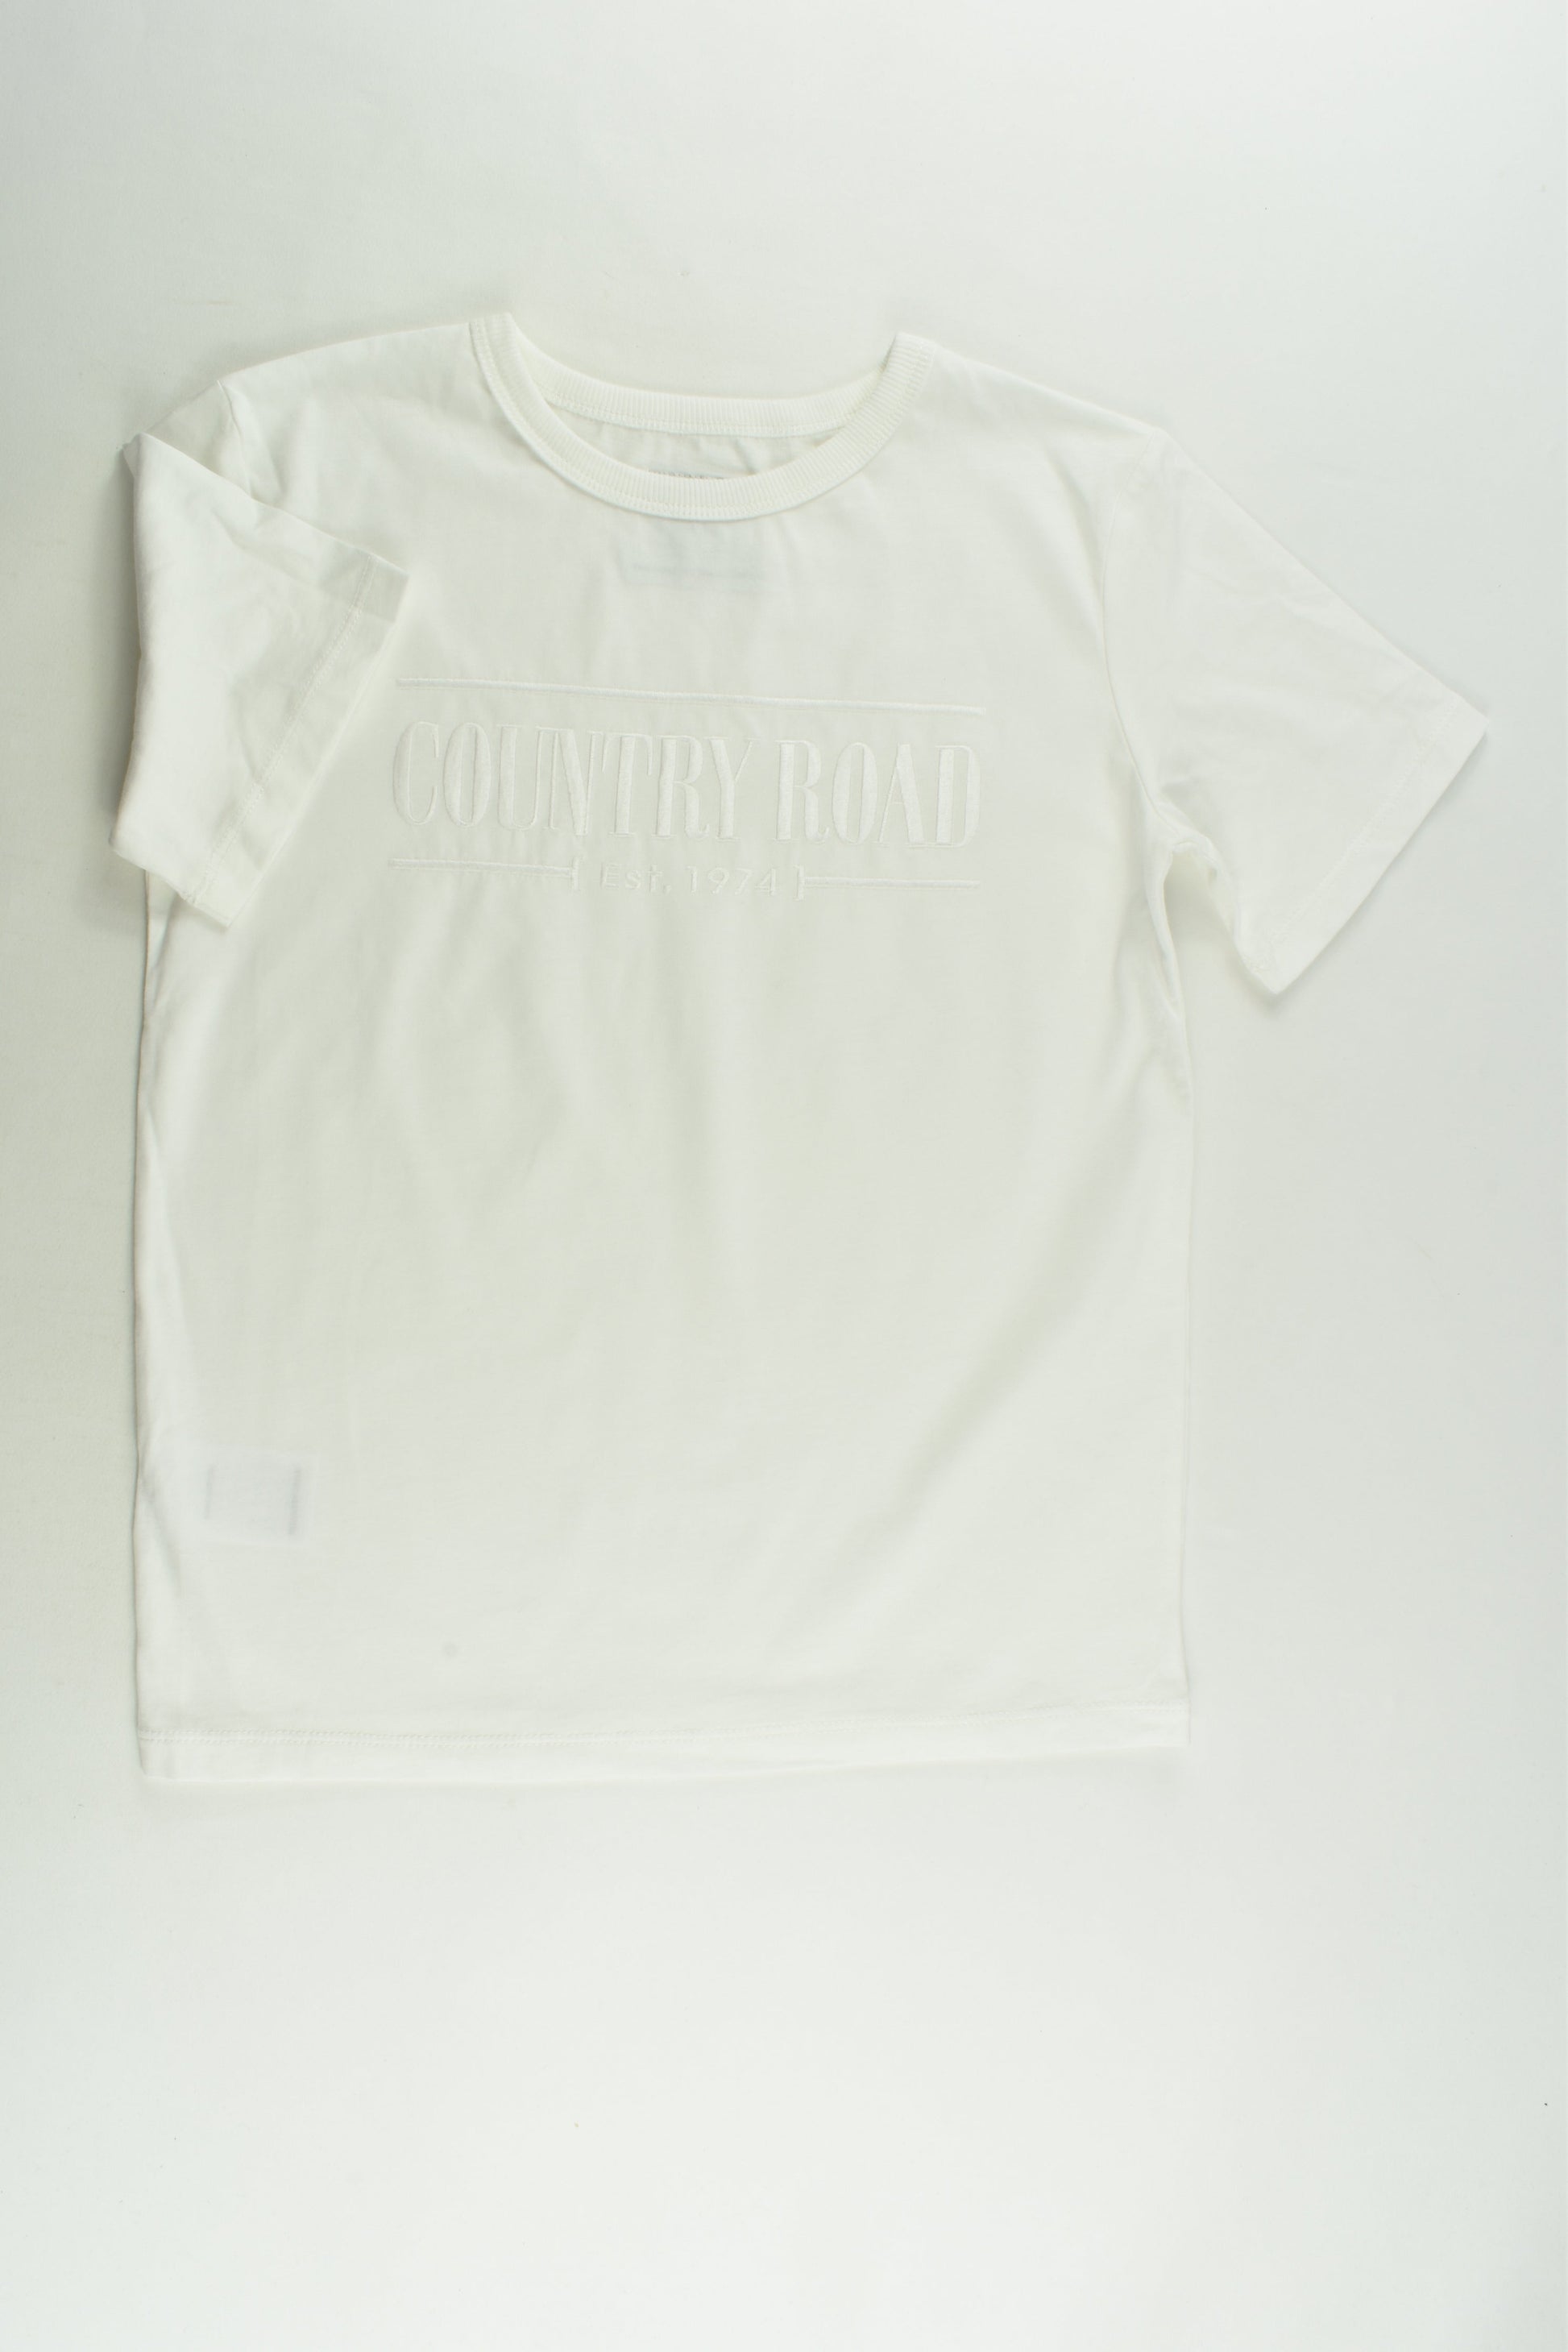 Country Road Size 8 Heritage T-shirt